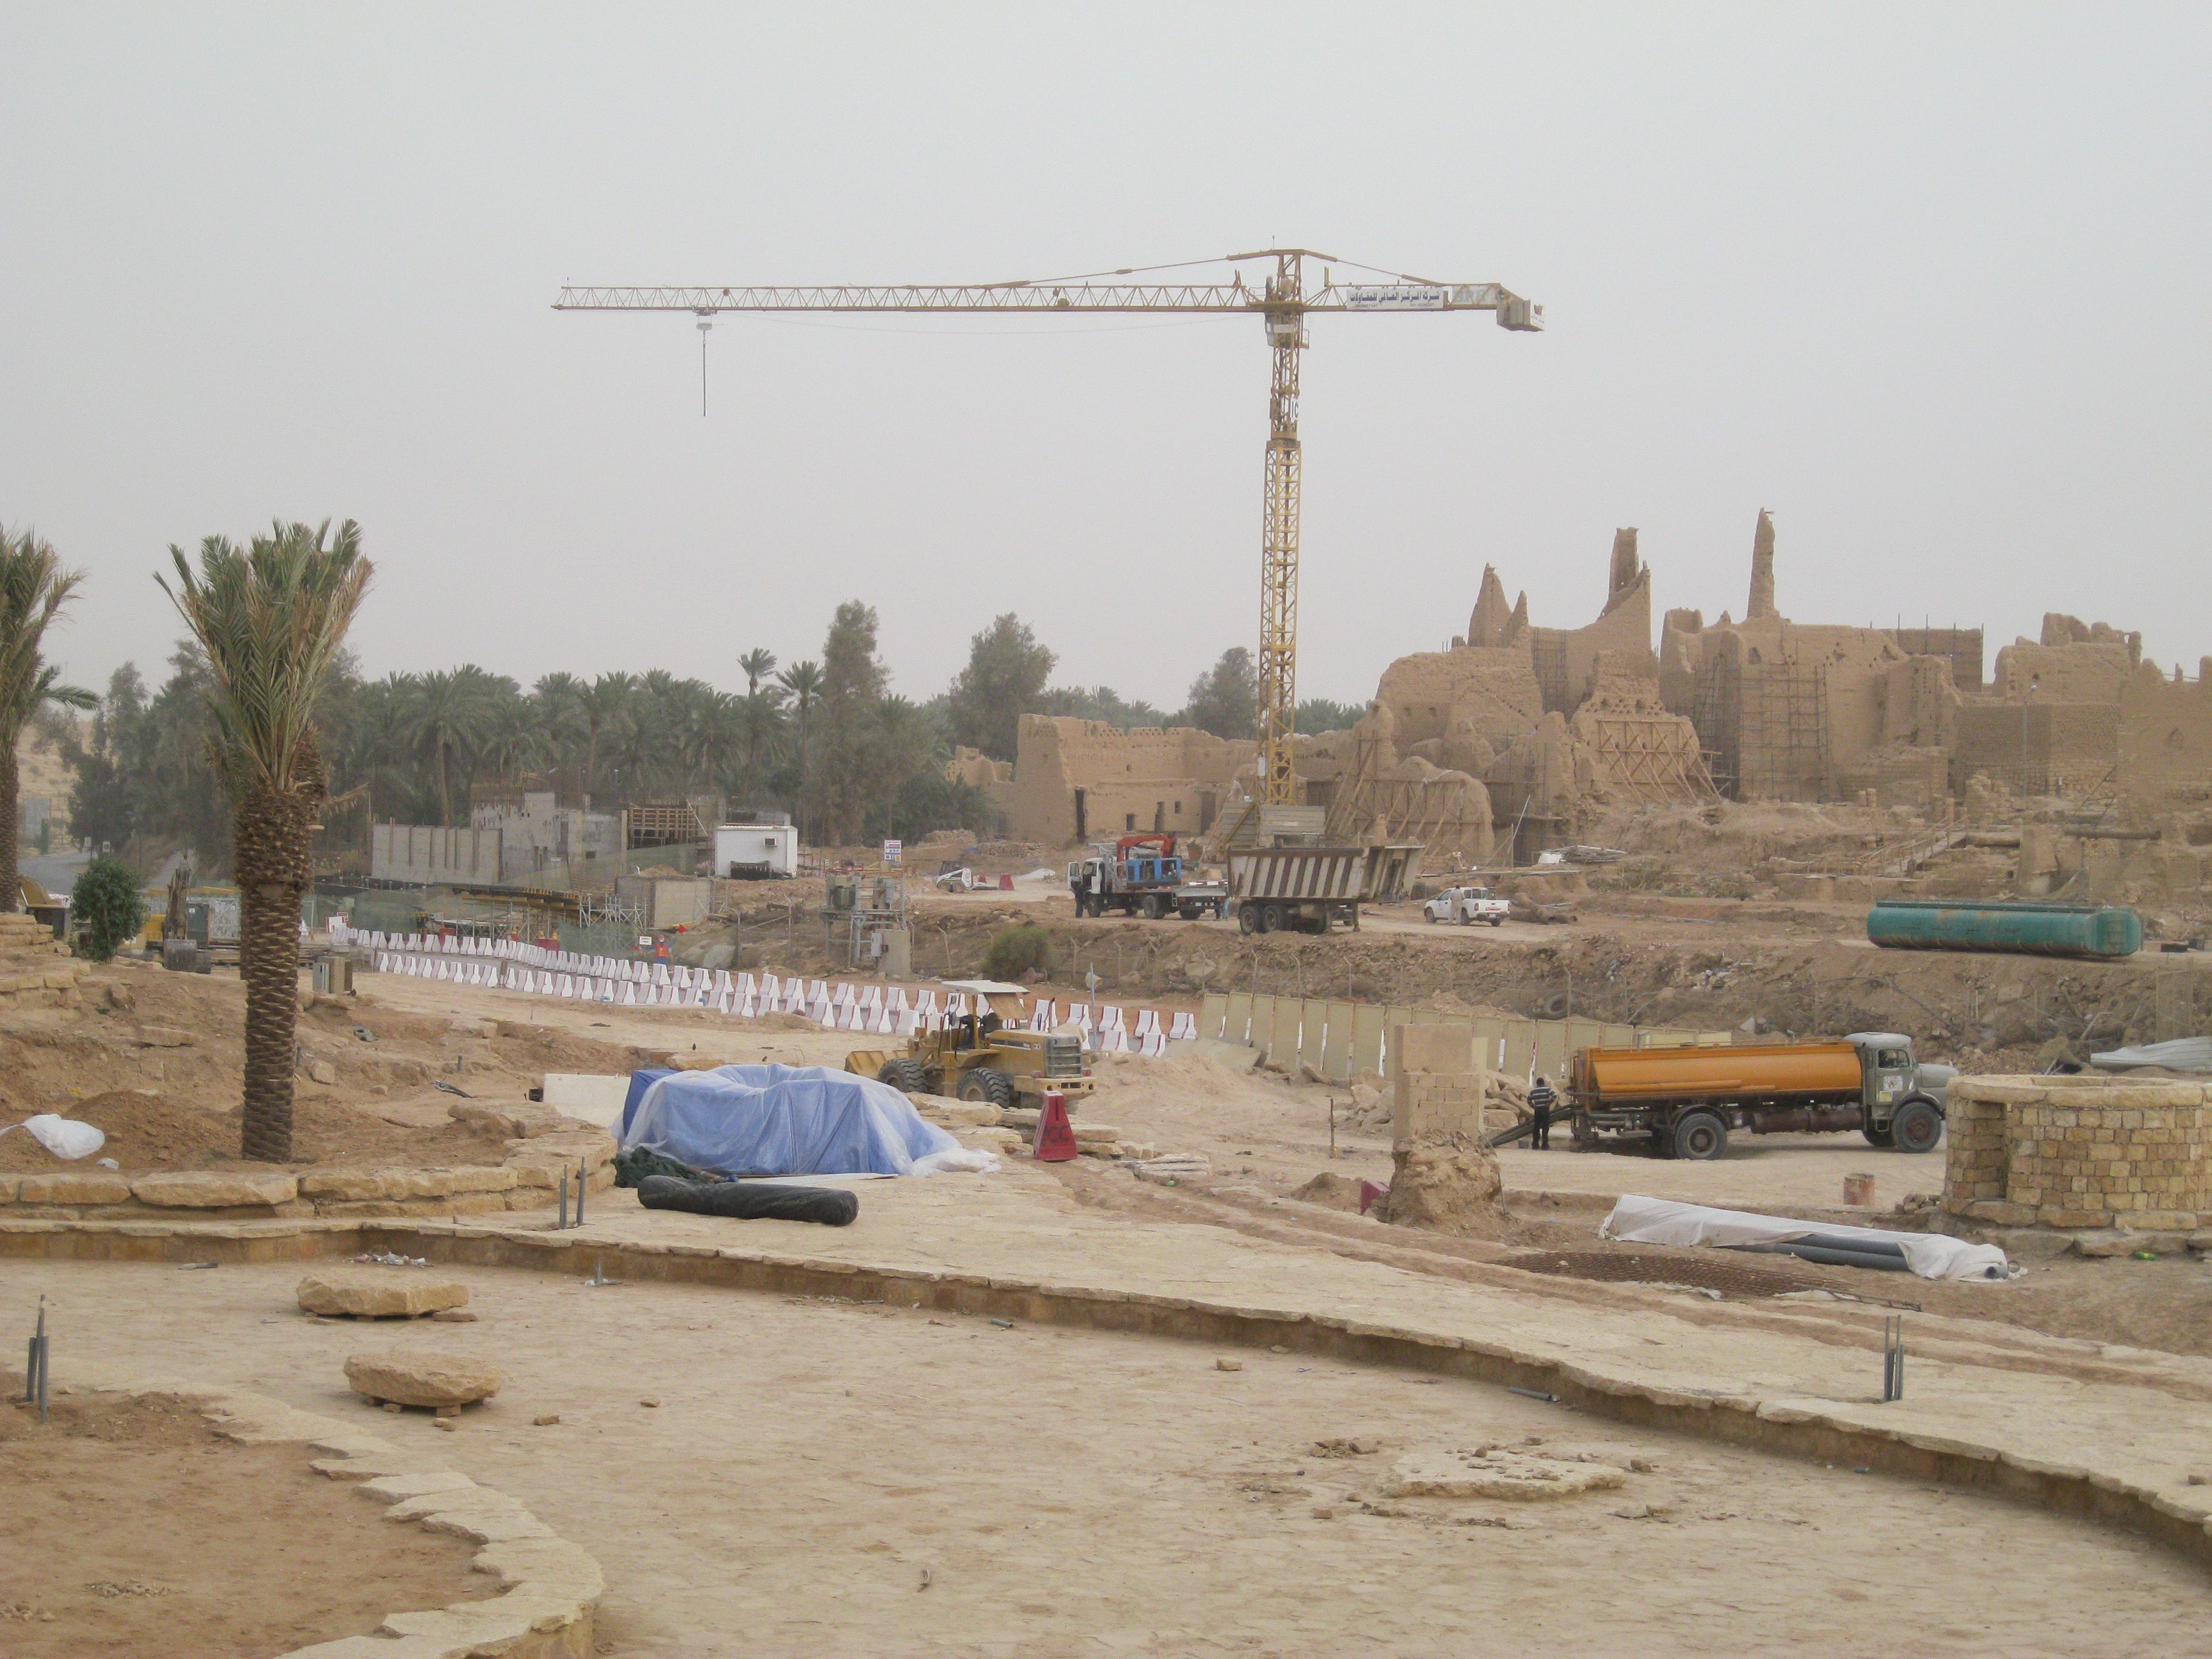 Renovation takes place in 2010 on part of a structure thought to be Salwa Palace, adjacent to al-Bujairi District (MEE/Rosie Bsheer)